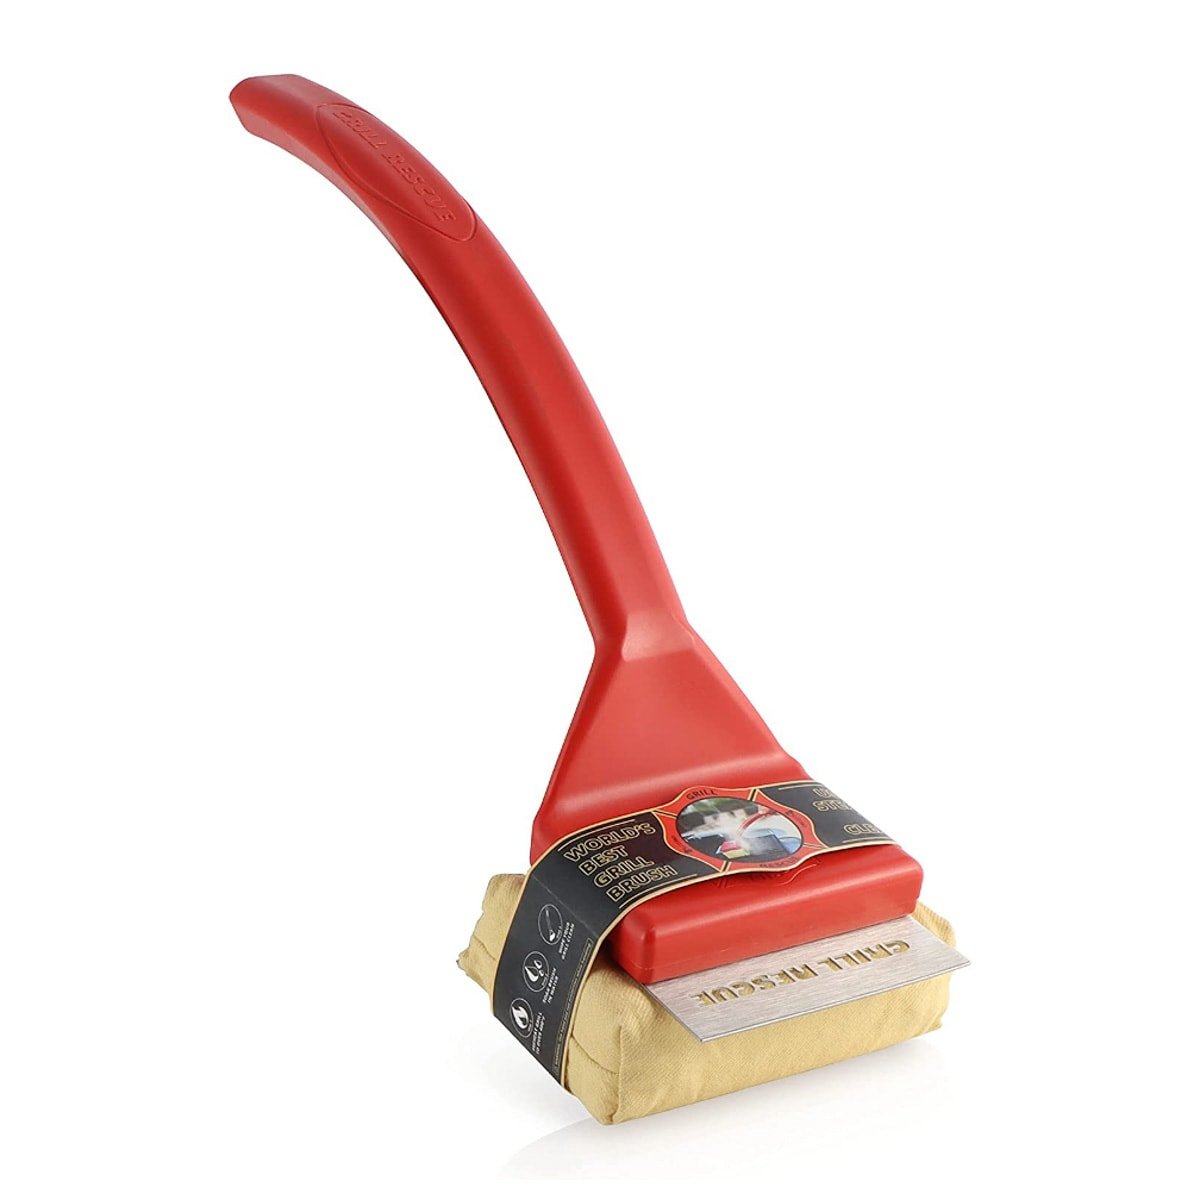 A plastic red handled tool with a metal scraper and beige pad used to clean a grill.